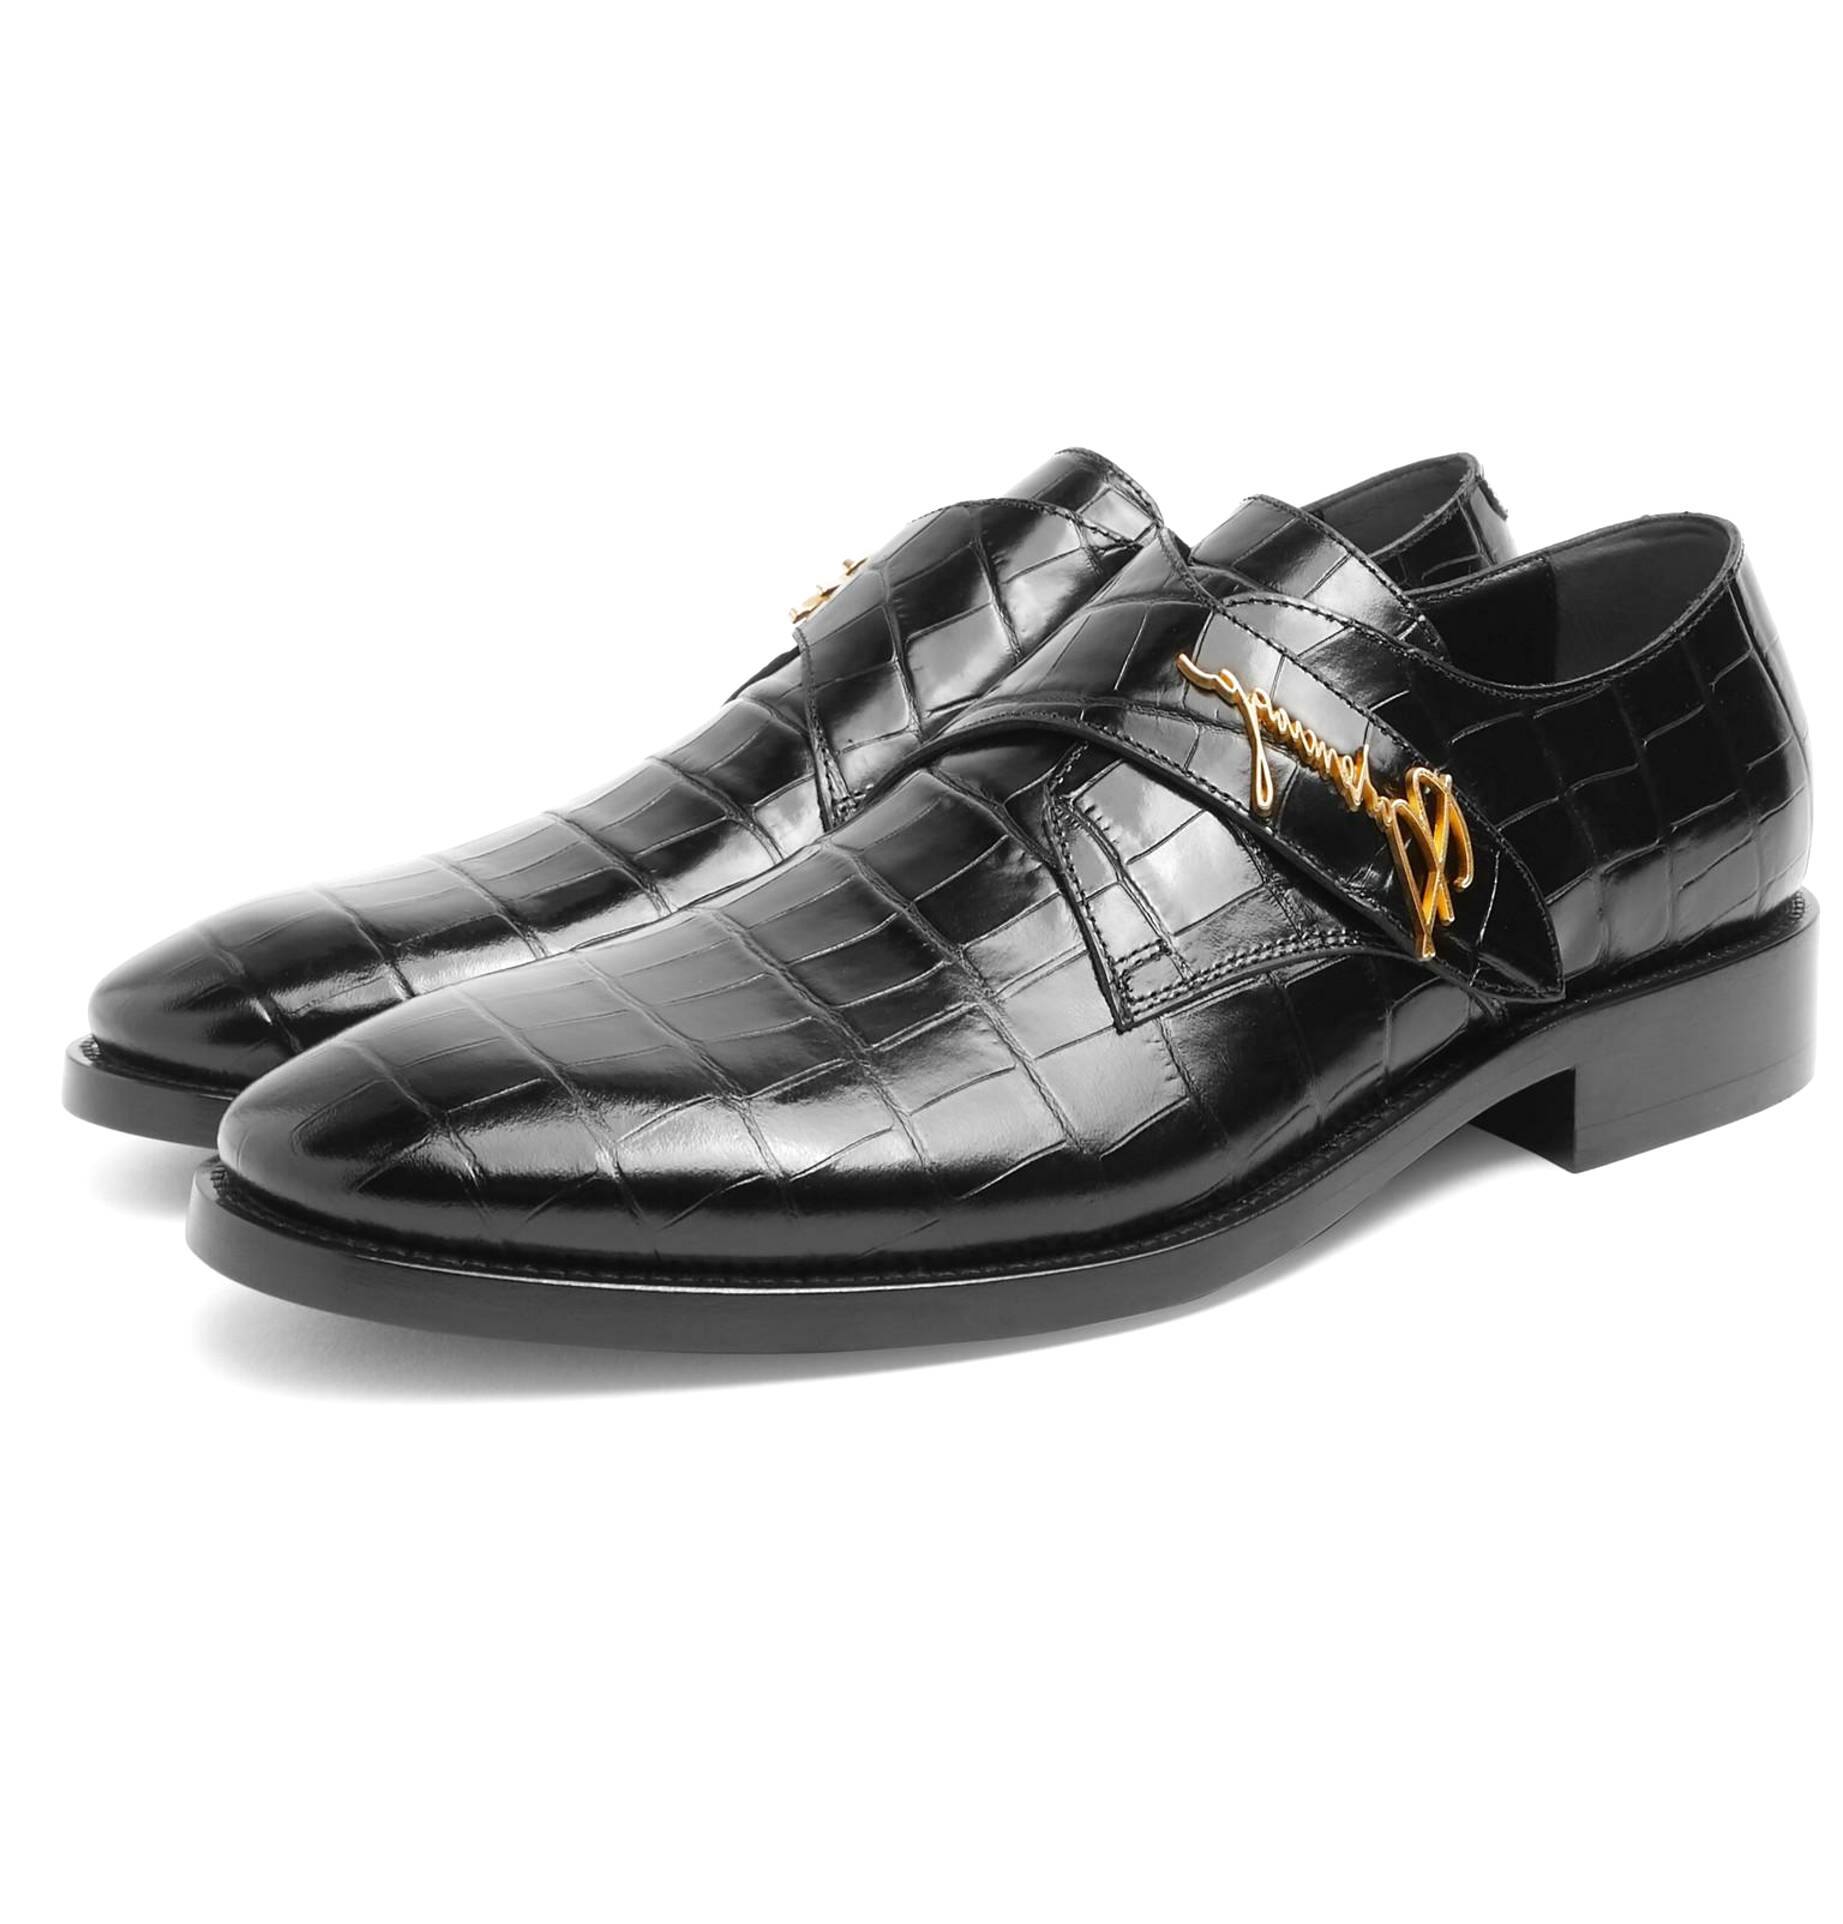 Mens Leather Croc Shoes for sale in UK | 69 used Mens Leather Croc Shoes